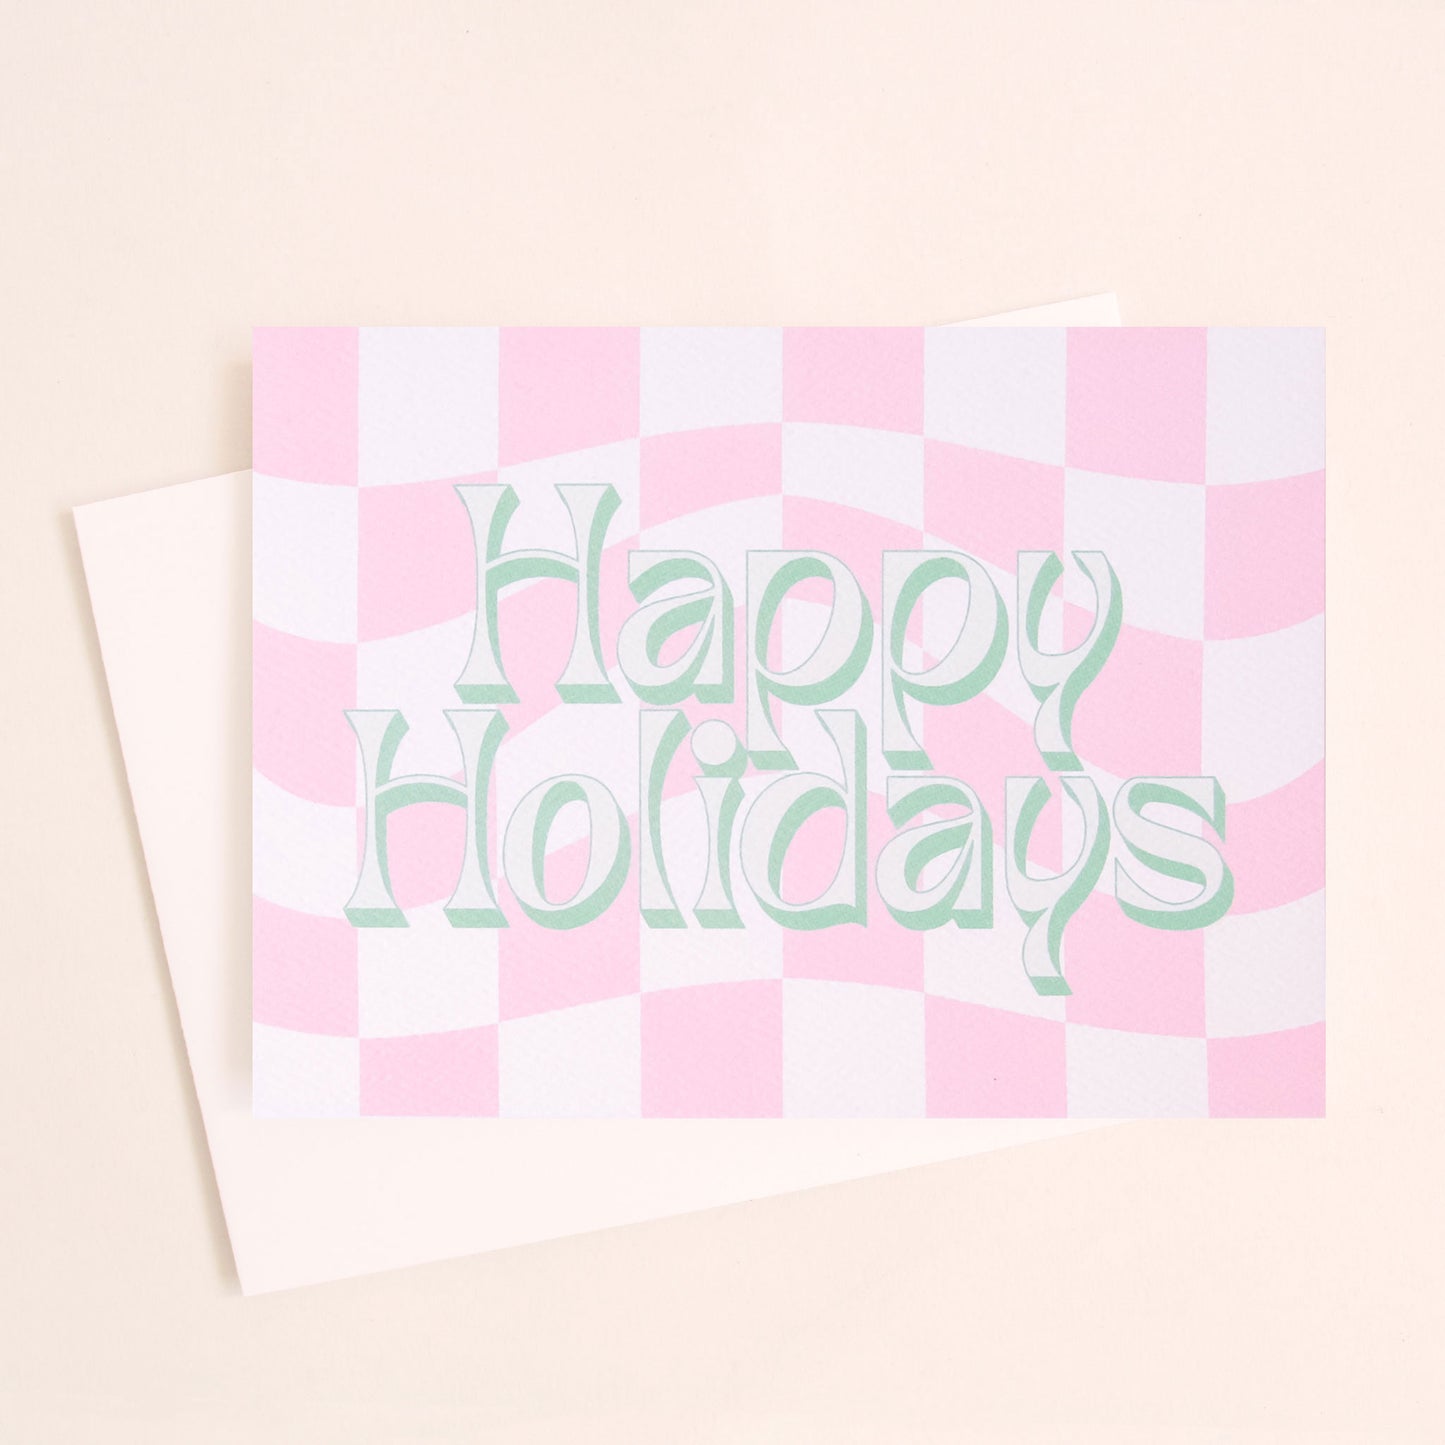 A pink and white checkered card with green and ivory text that reads, "Happy Holidays".